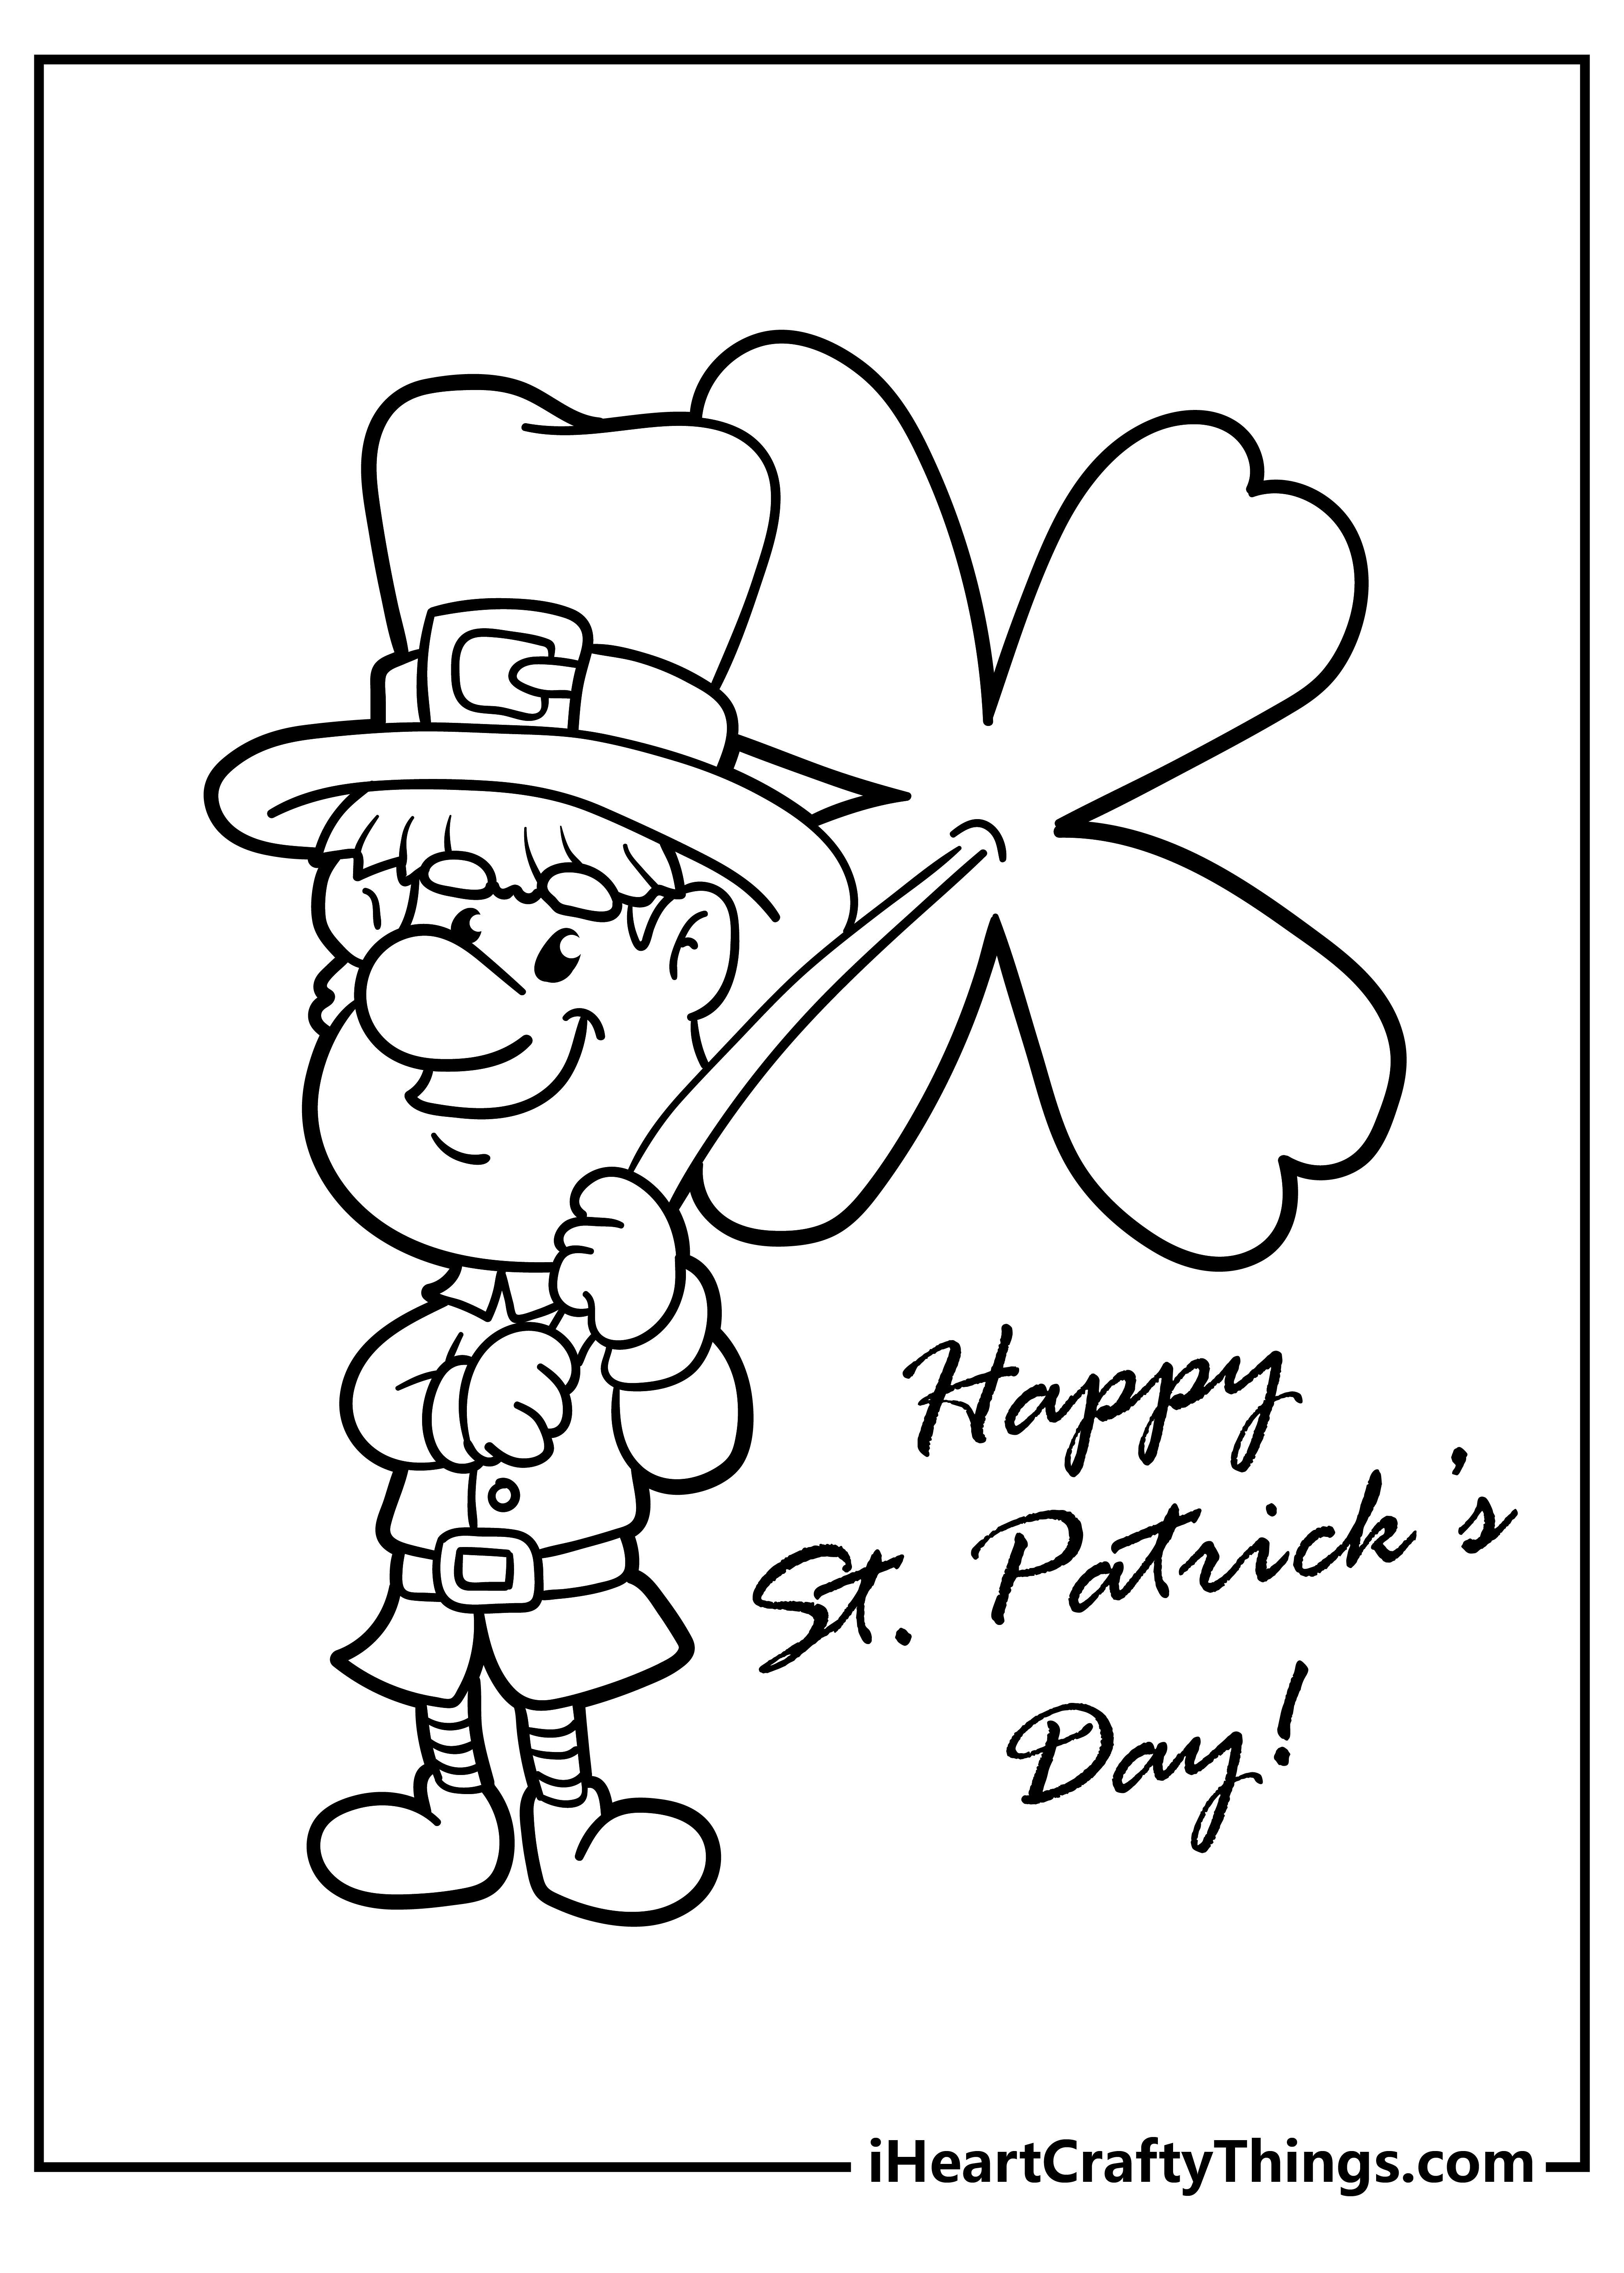 St Patrick’s Day Coloring Pages for adults free printable